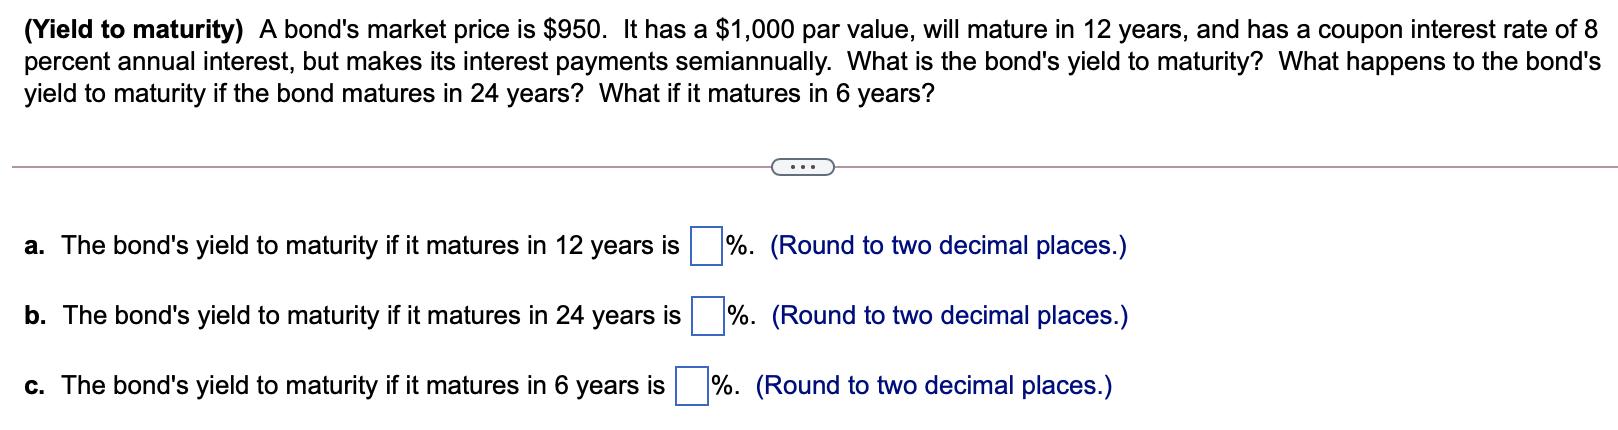 (Yield to maturity) A bonds market price is $950. It has a $1,000 par value, will mature in 12 years, and has a coupon inter